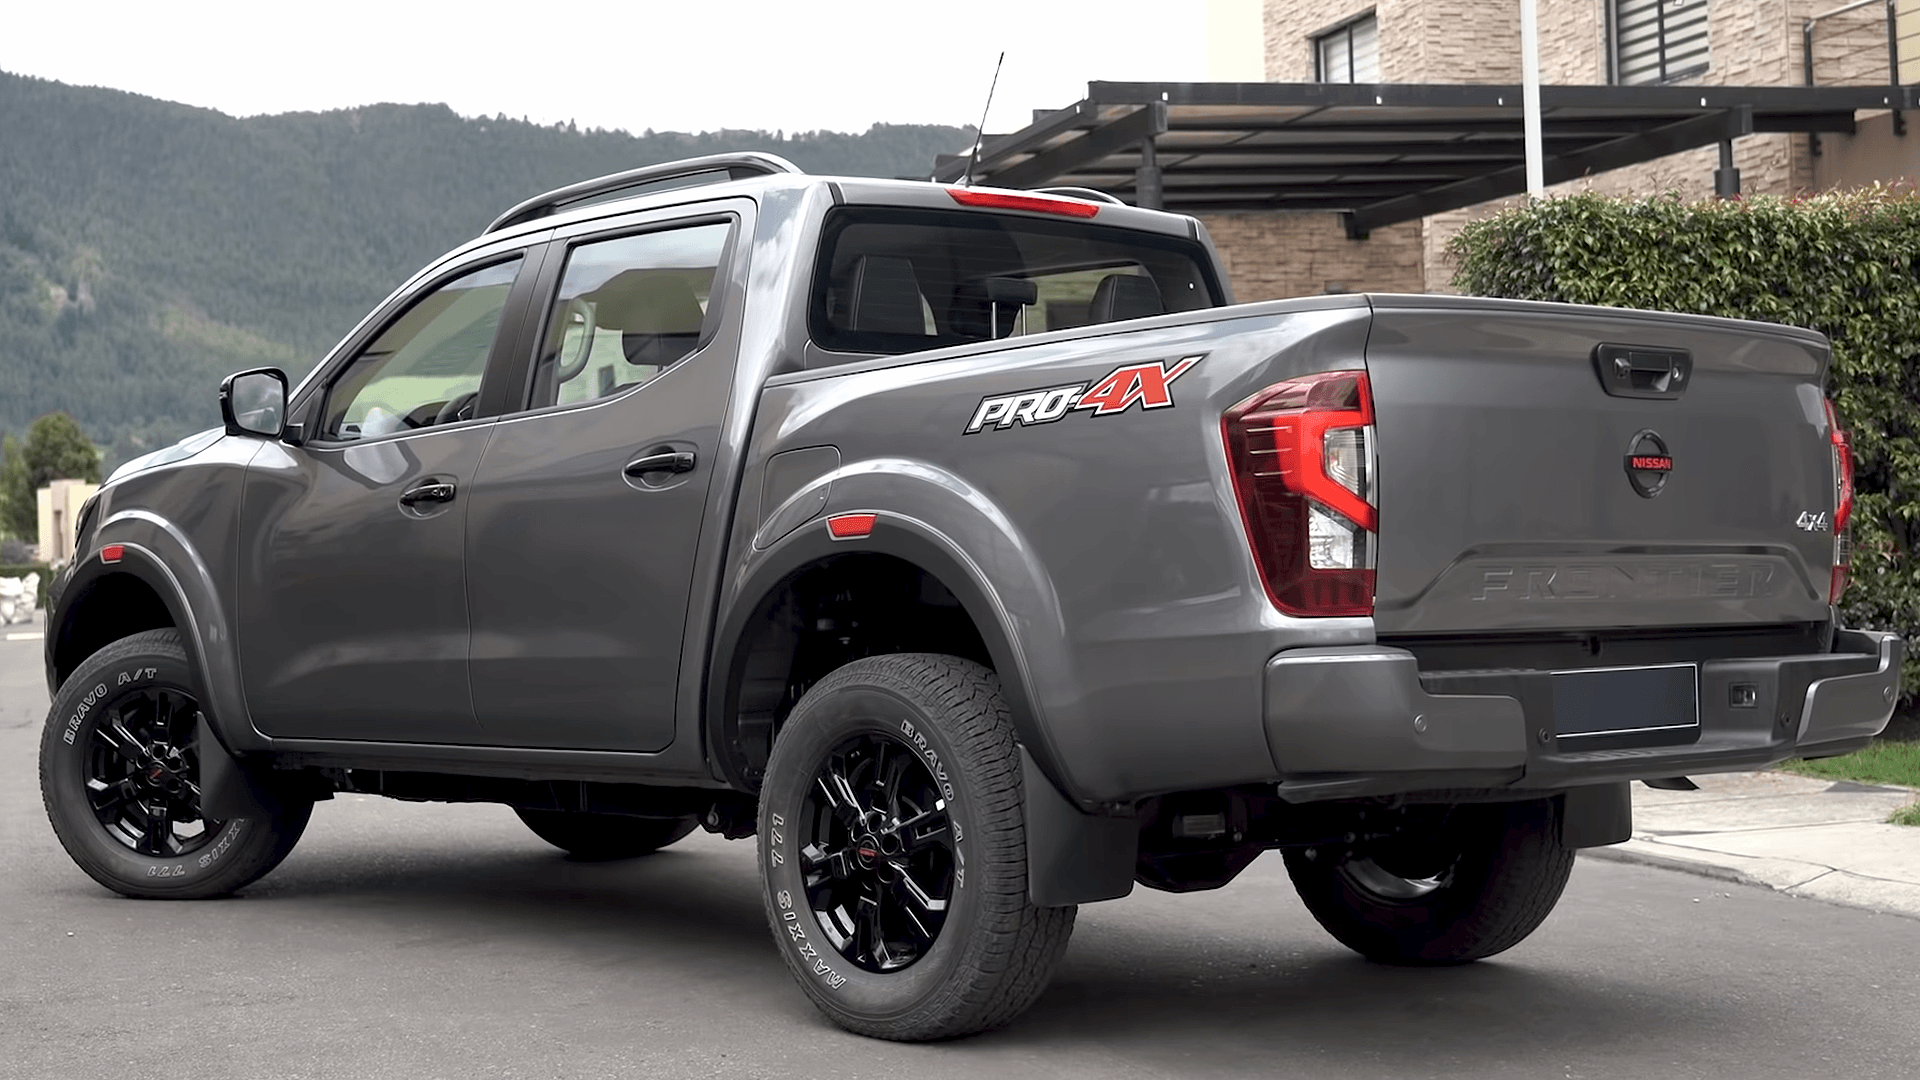 Image 2021 Nissan Frontier Pro 4X (Colombia; facelift) rear view